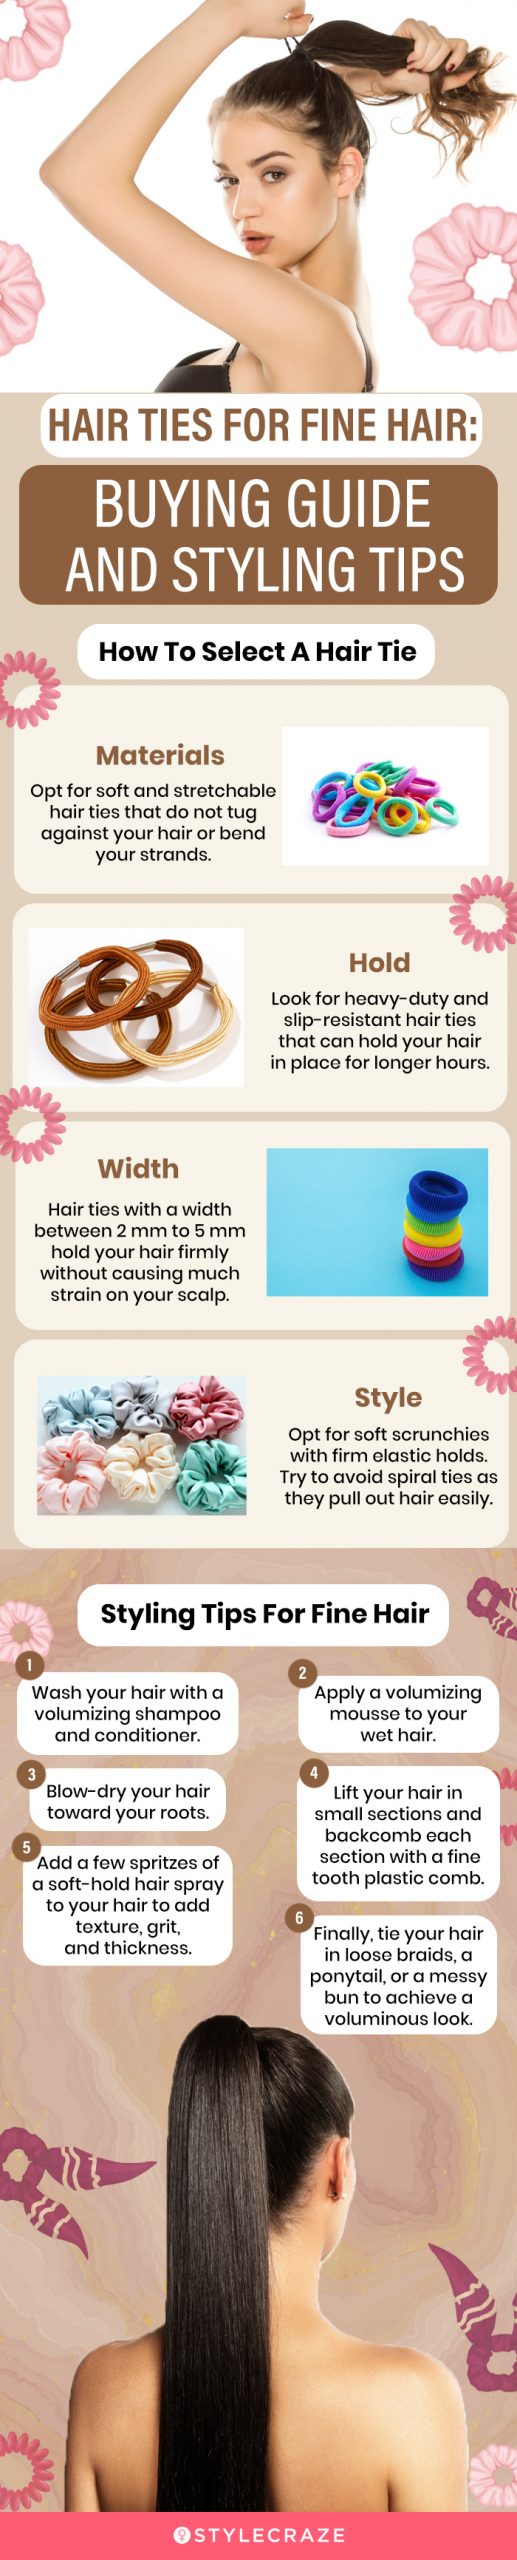 Hair Tie For Fine Hair: Buying Guide [infographic]